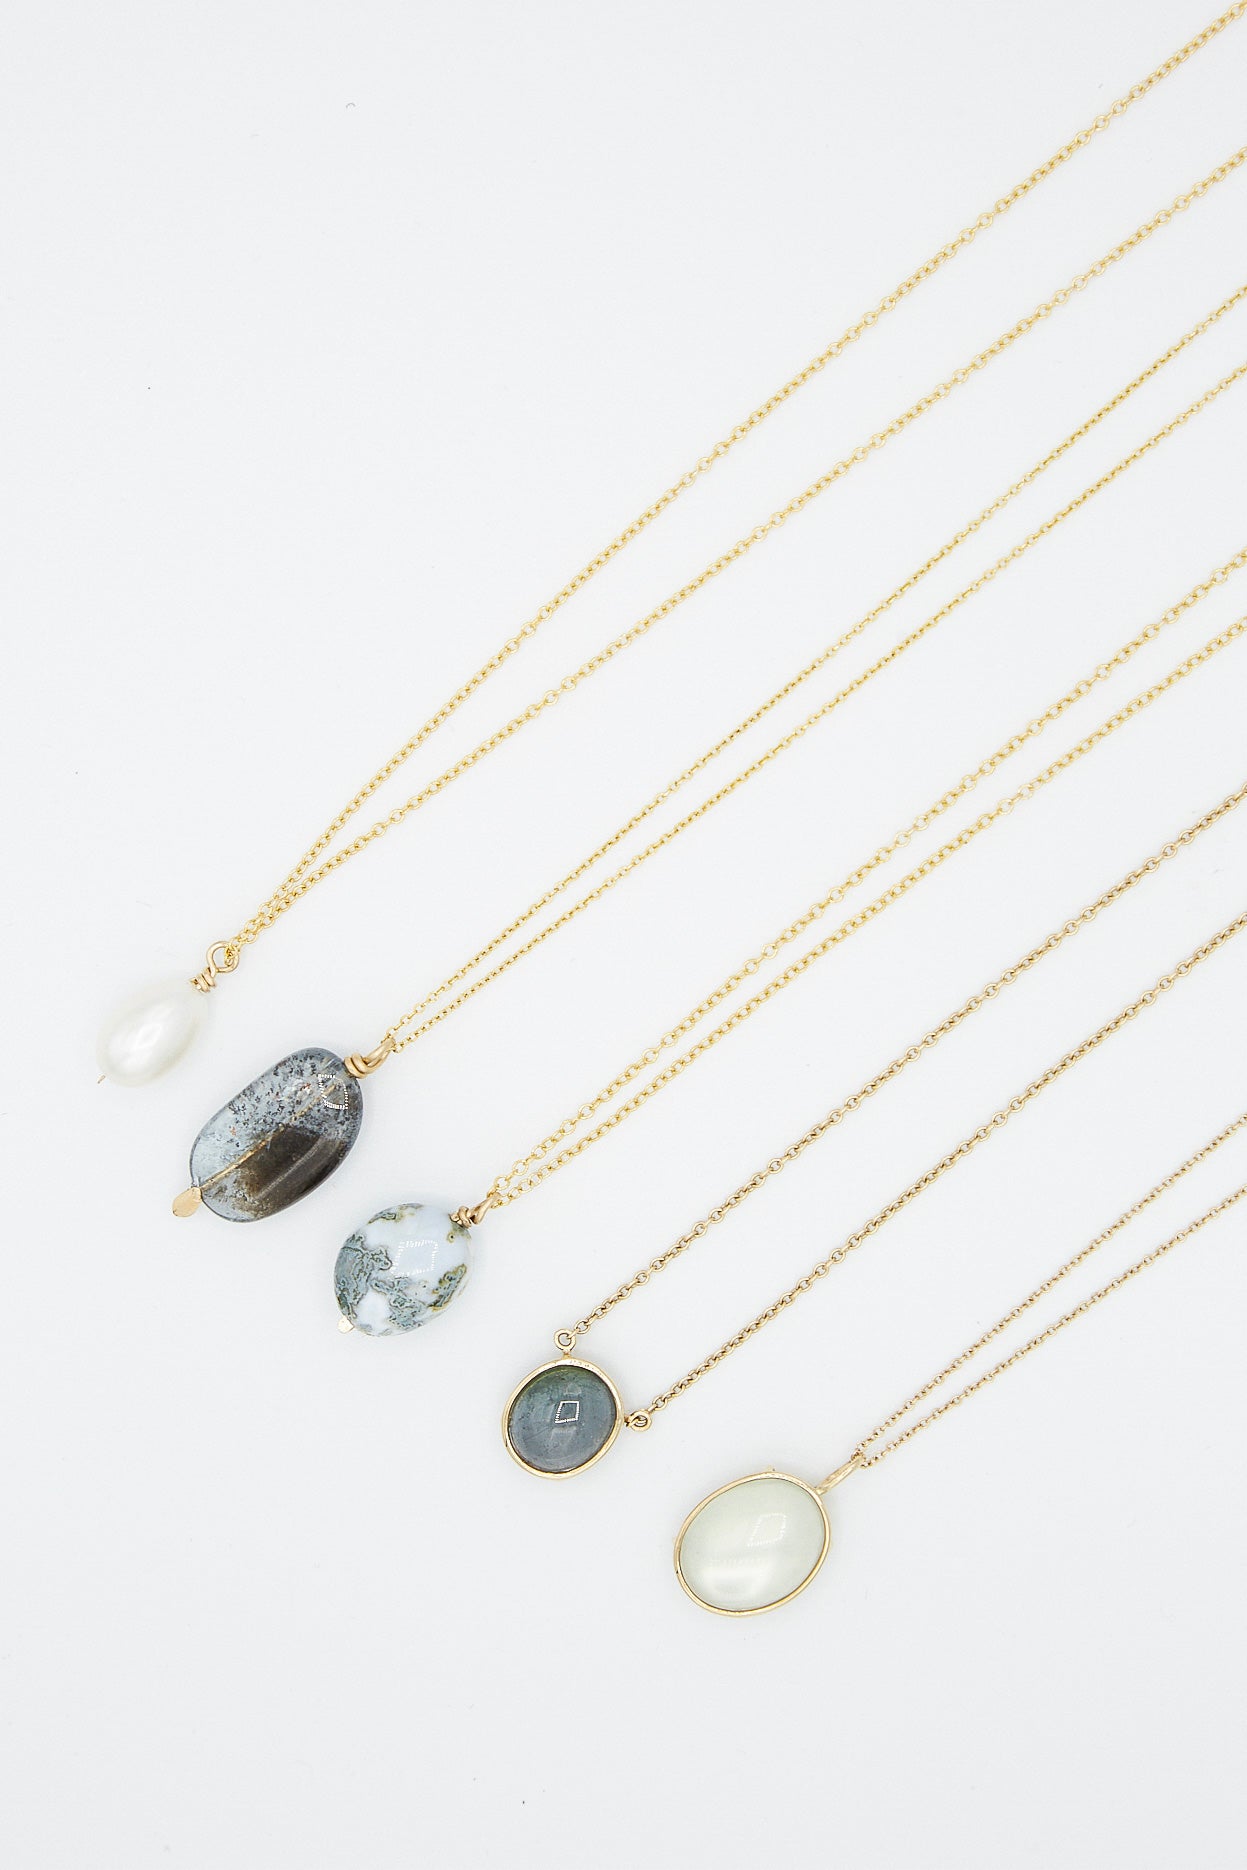 A group of Floating Necklaces in Light Green Tourmaline stones and pearls on a white background by Mary MacGill.